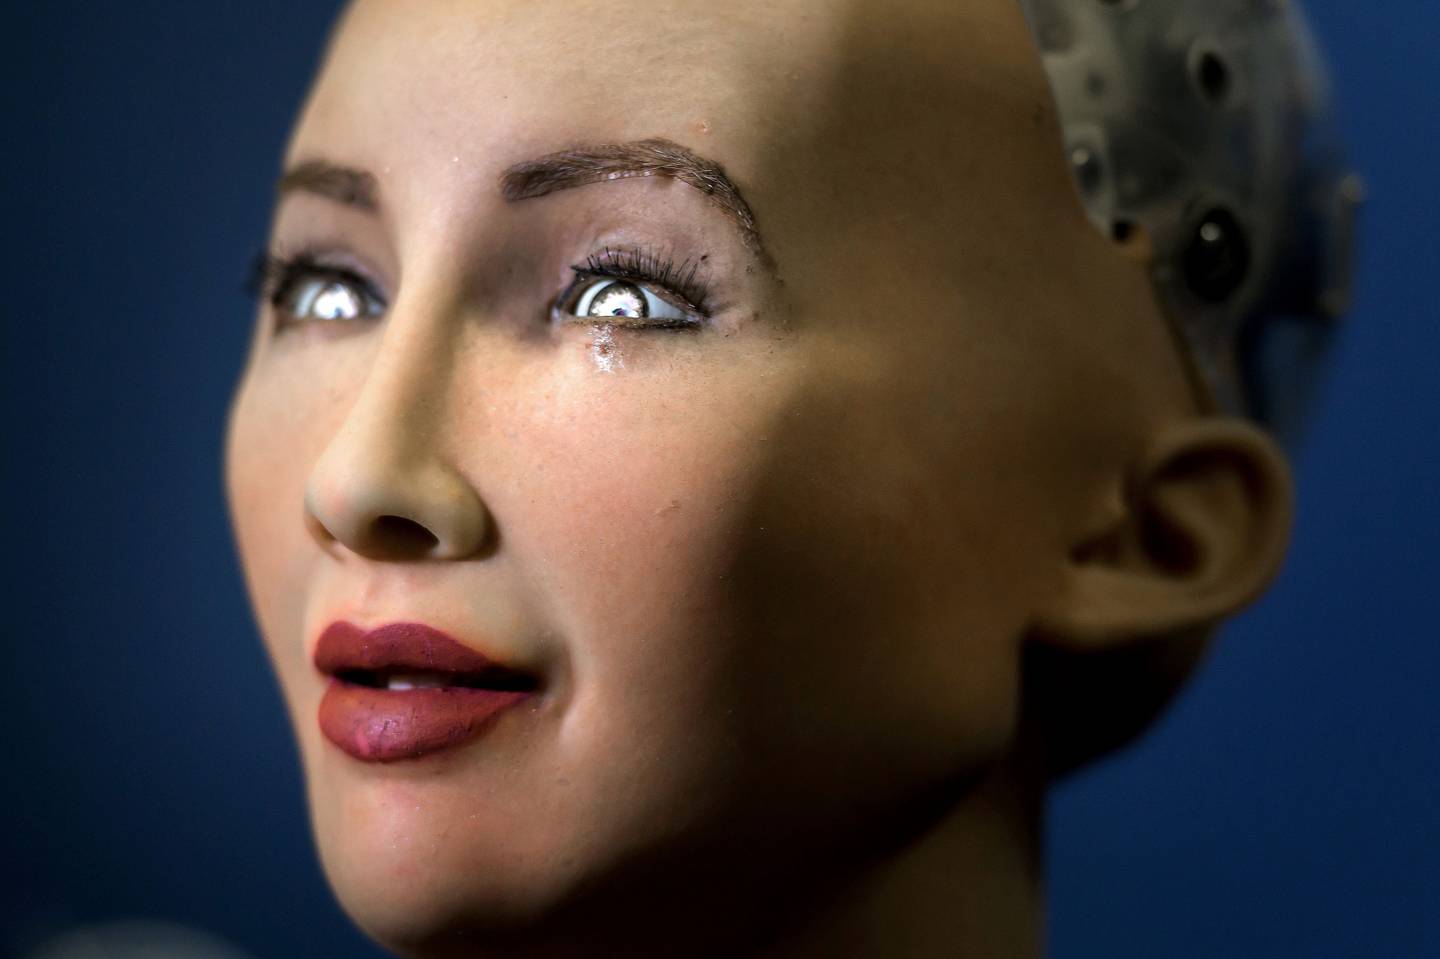 The Agony Of Sophia The World S First Robot Citizen Condemned To A Lifeless Career In Marketing